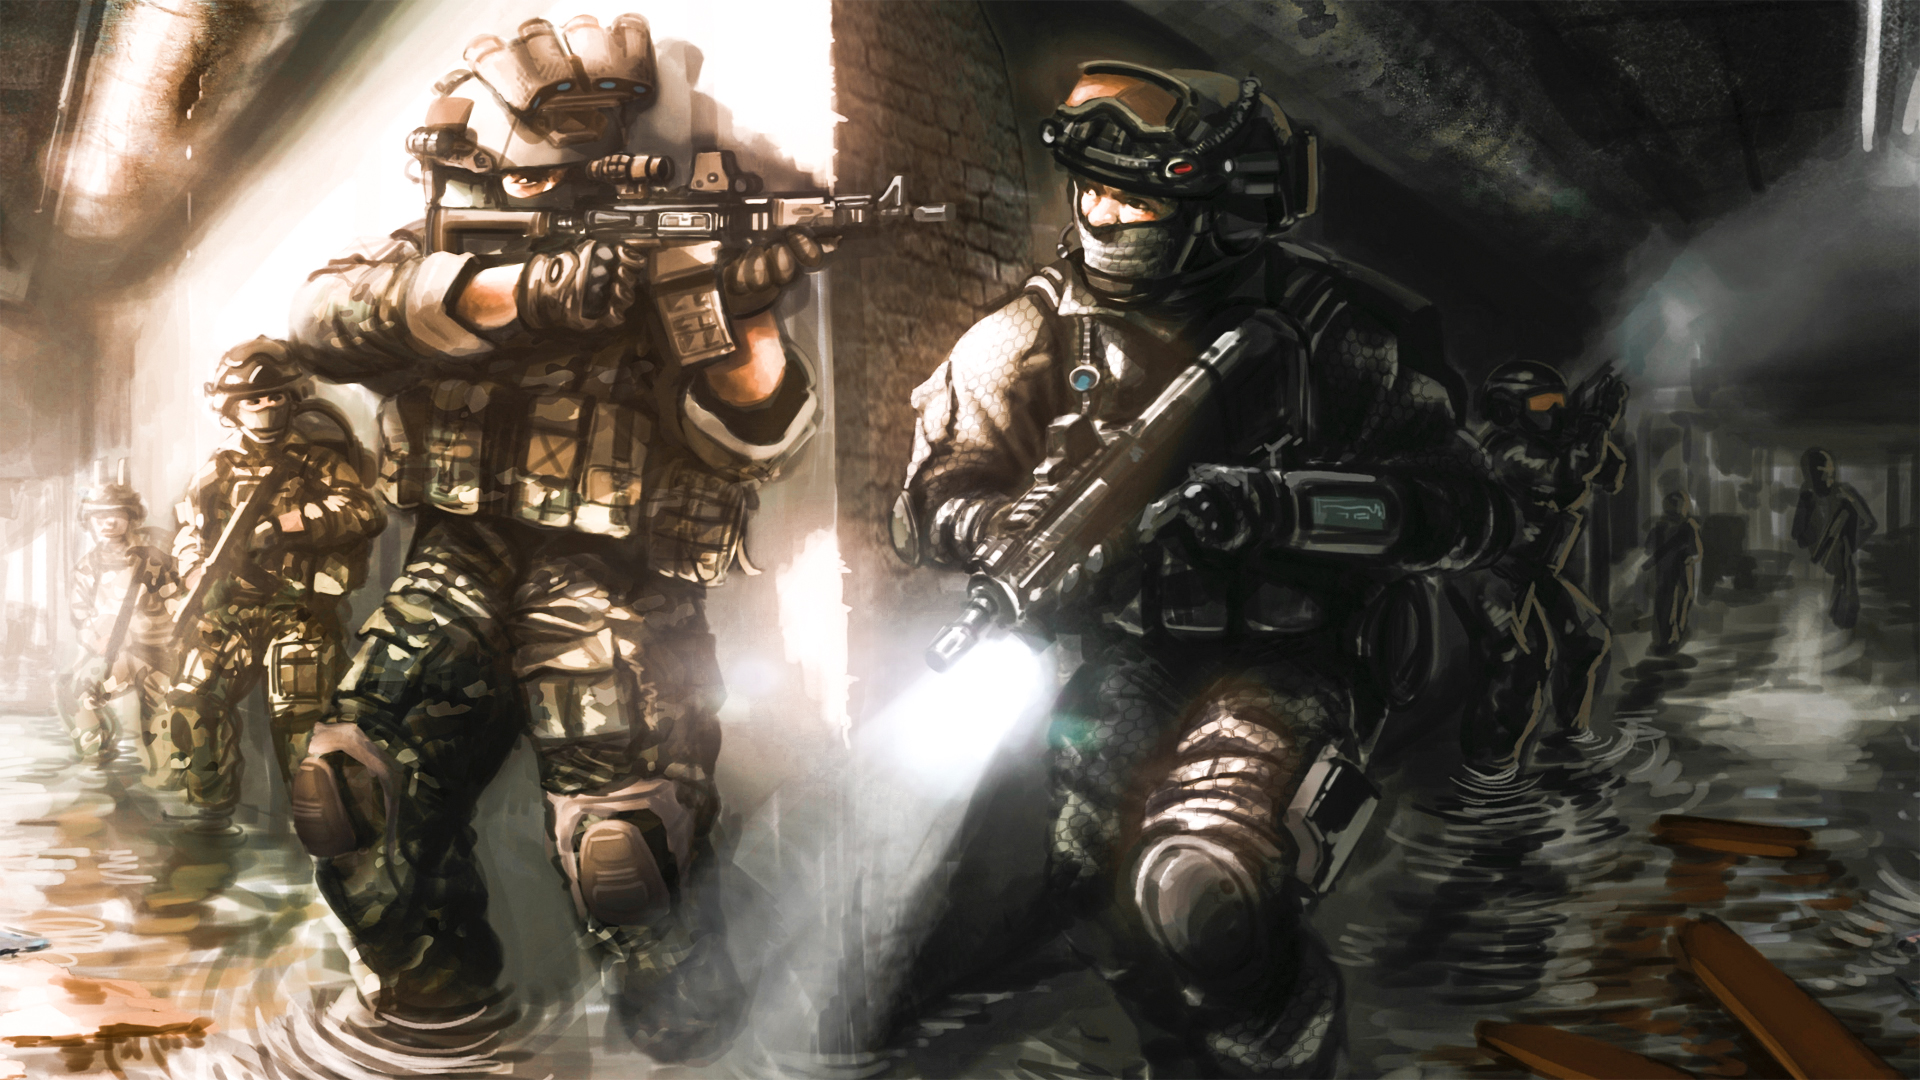 CT Special Forces 2: Back in the Trenches